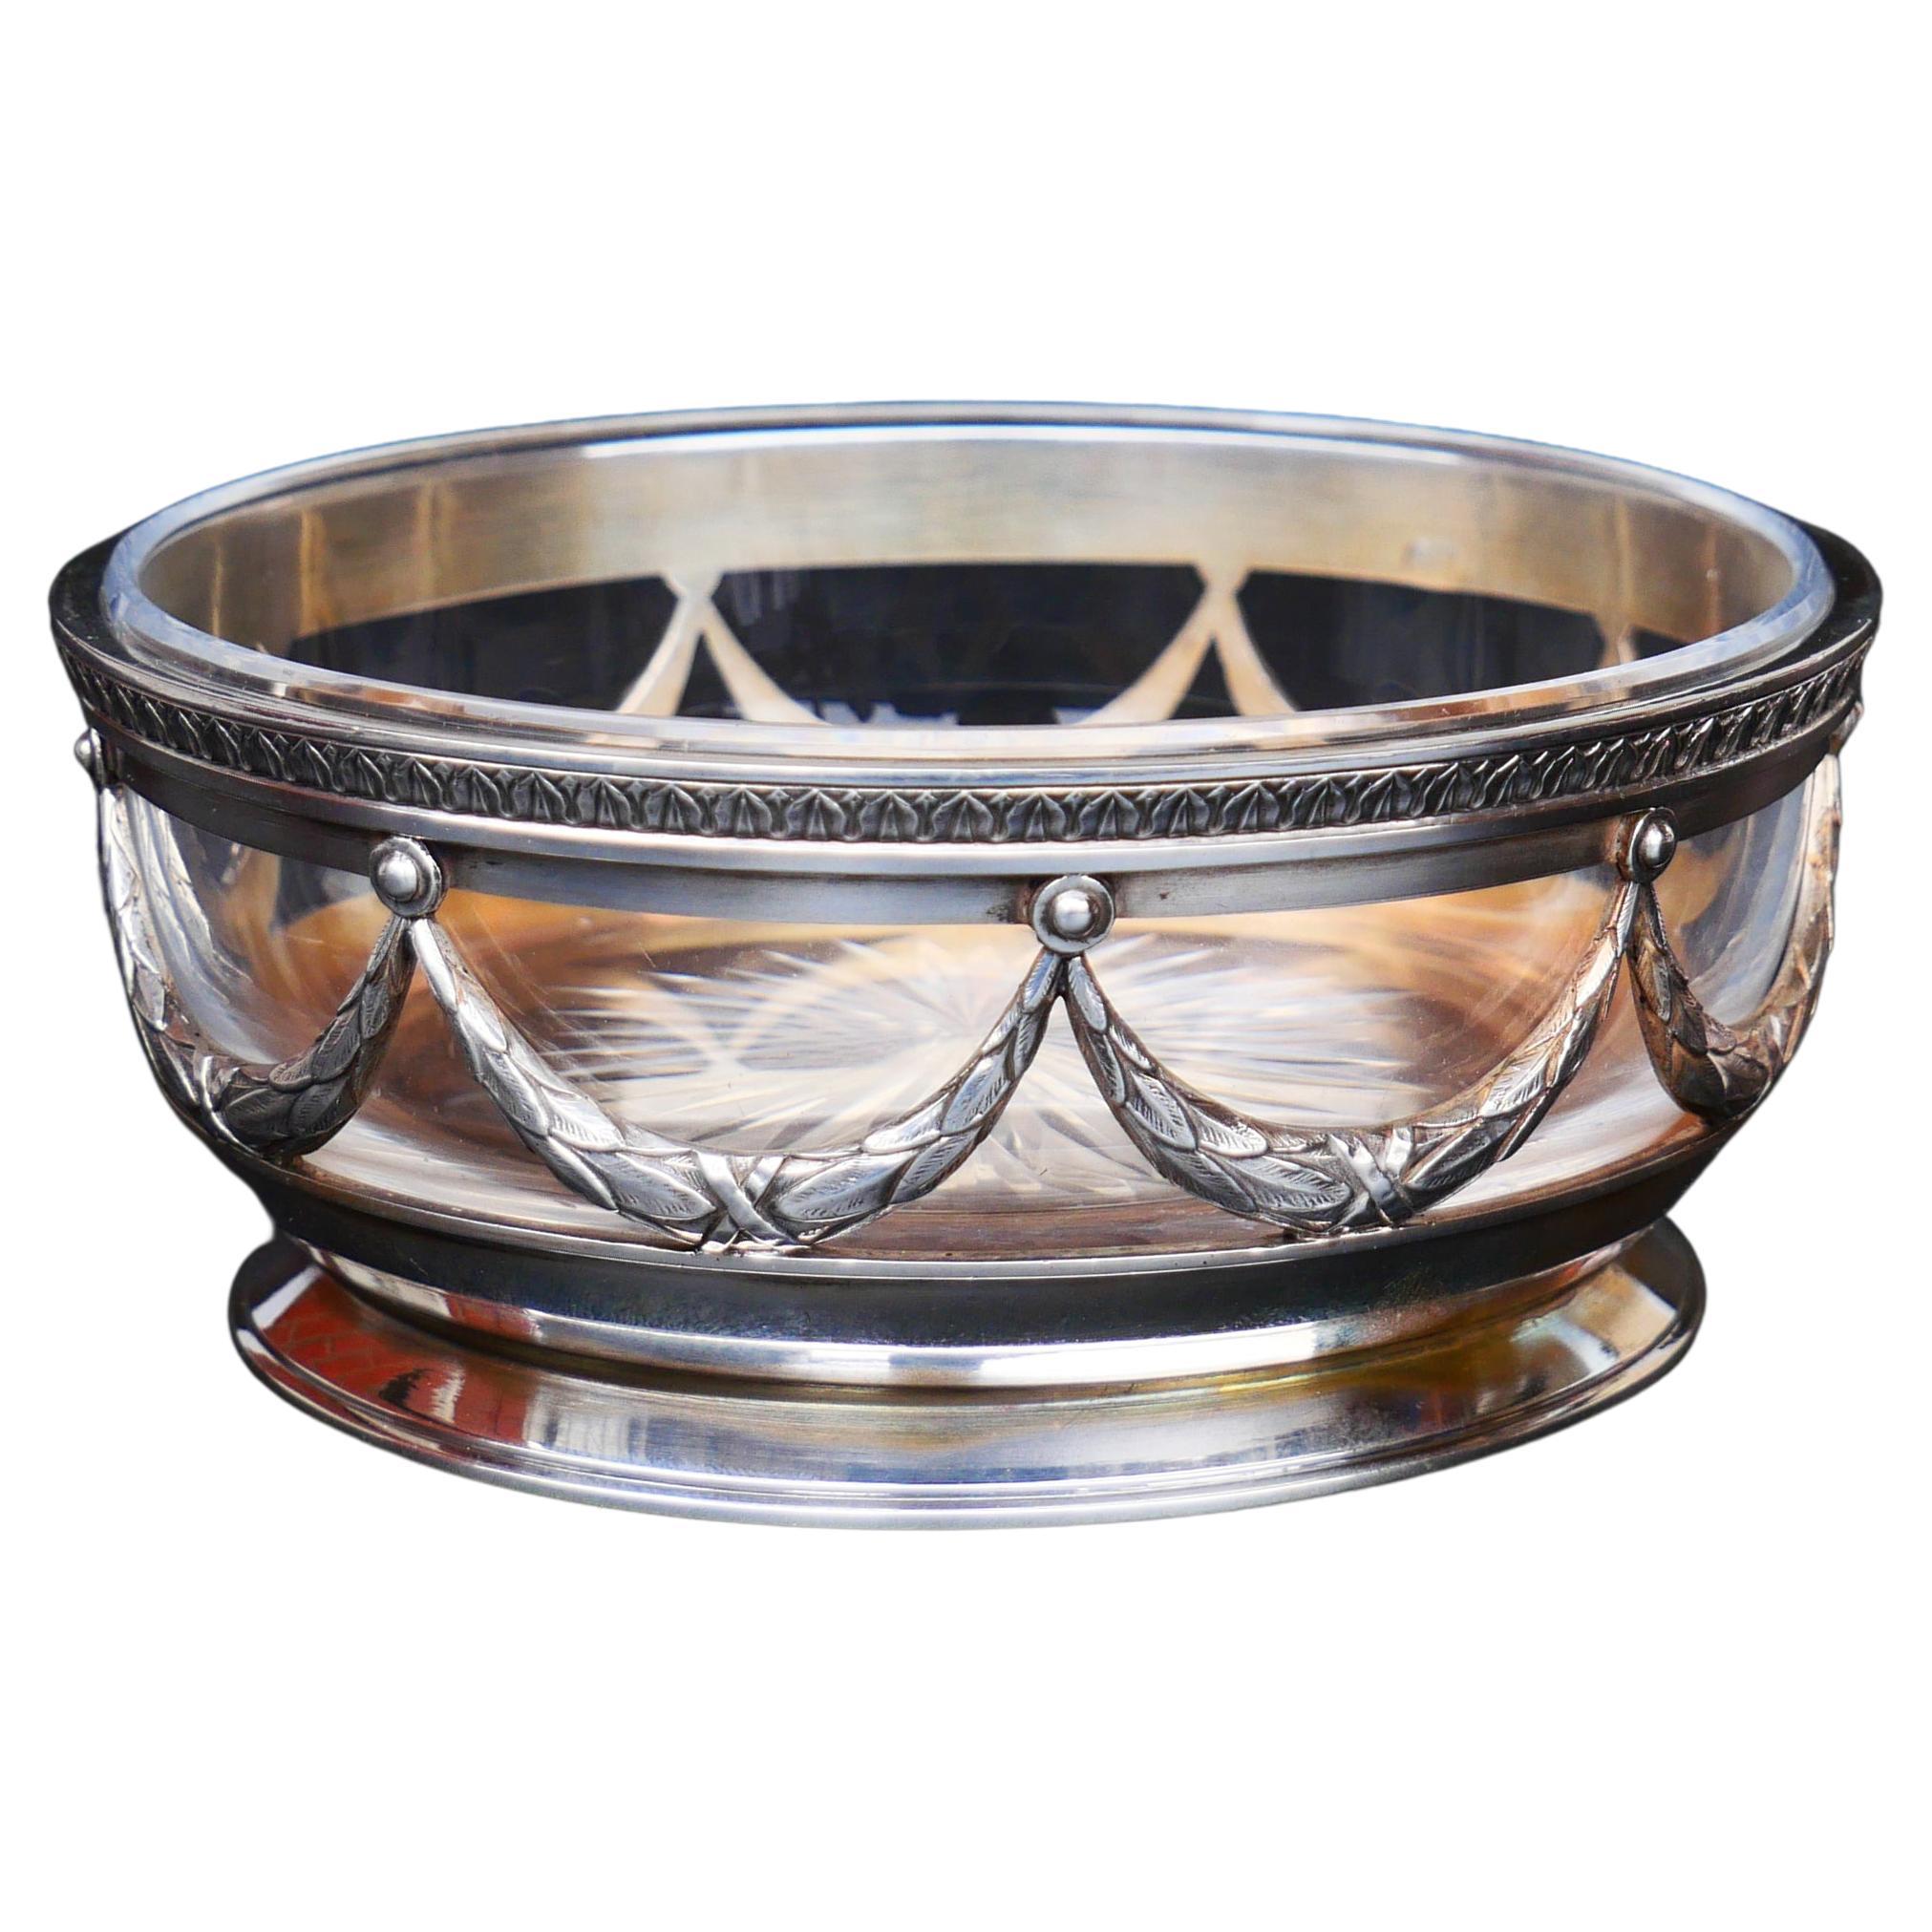 1908 -1916 Antique Faberge Russian Empire solid 84 Silver Cut Crystal Glass Bowl For Sale